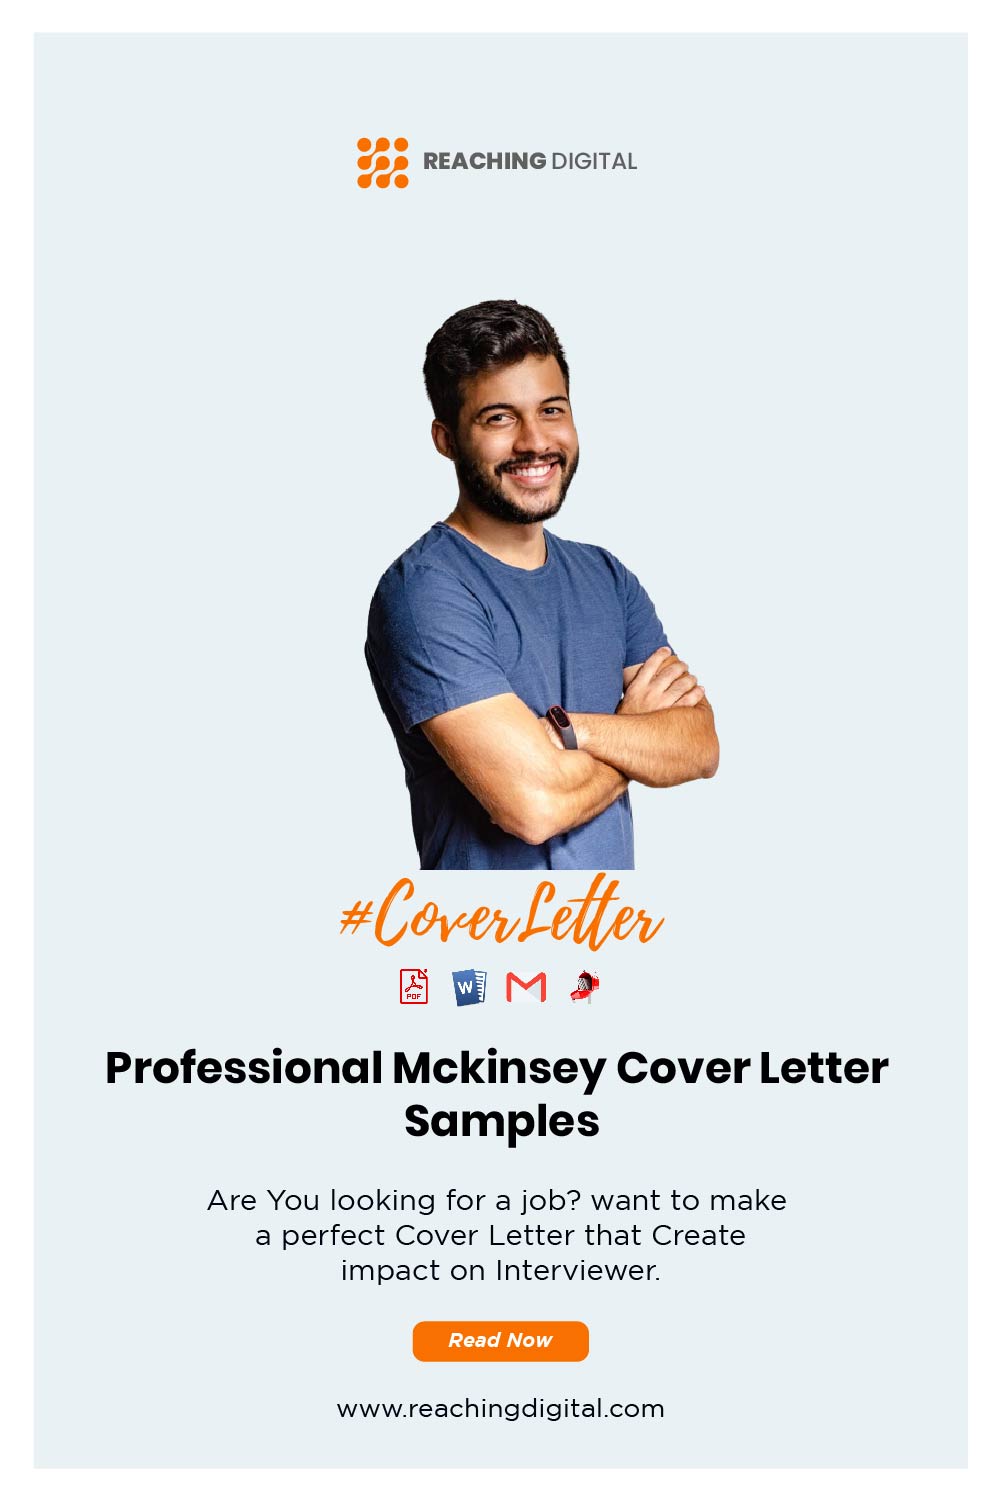 mckinsey & company cover letter